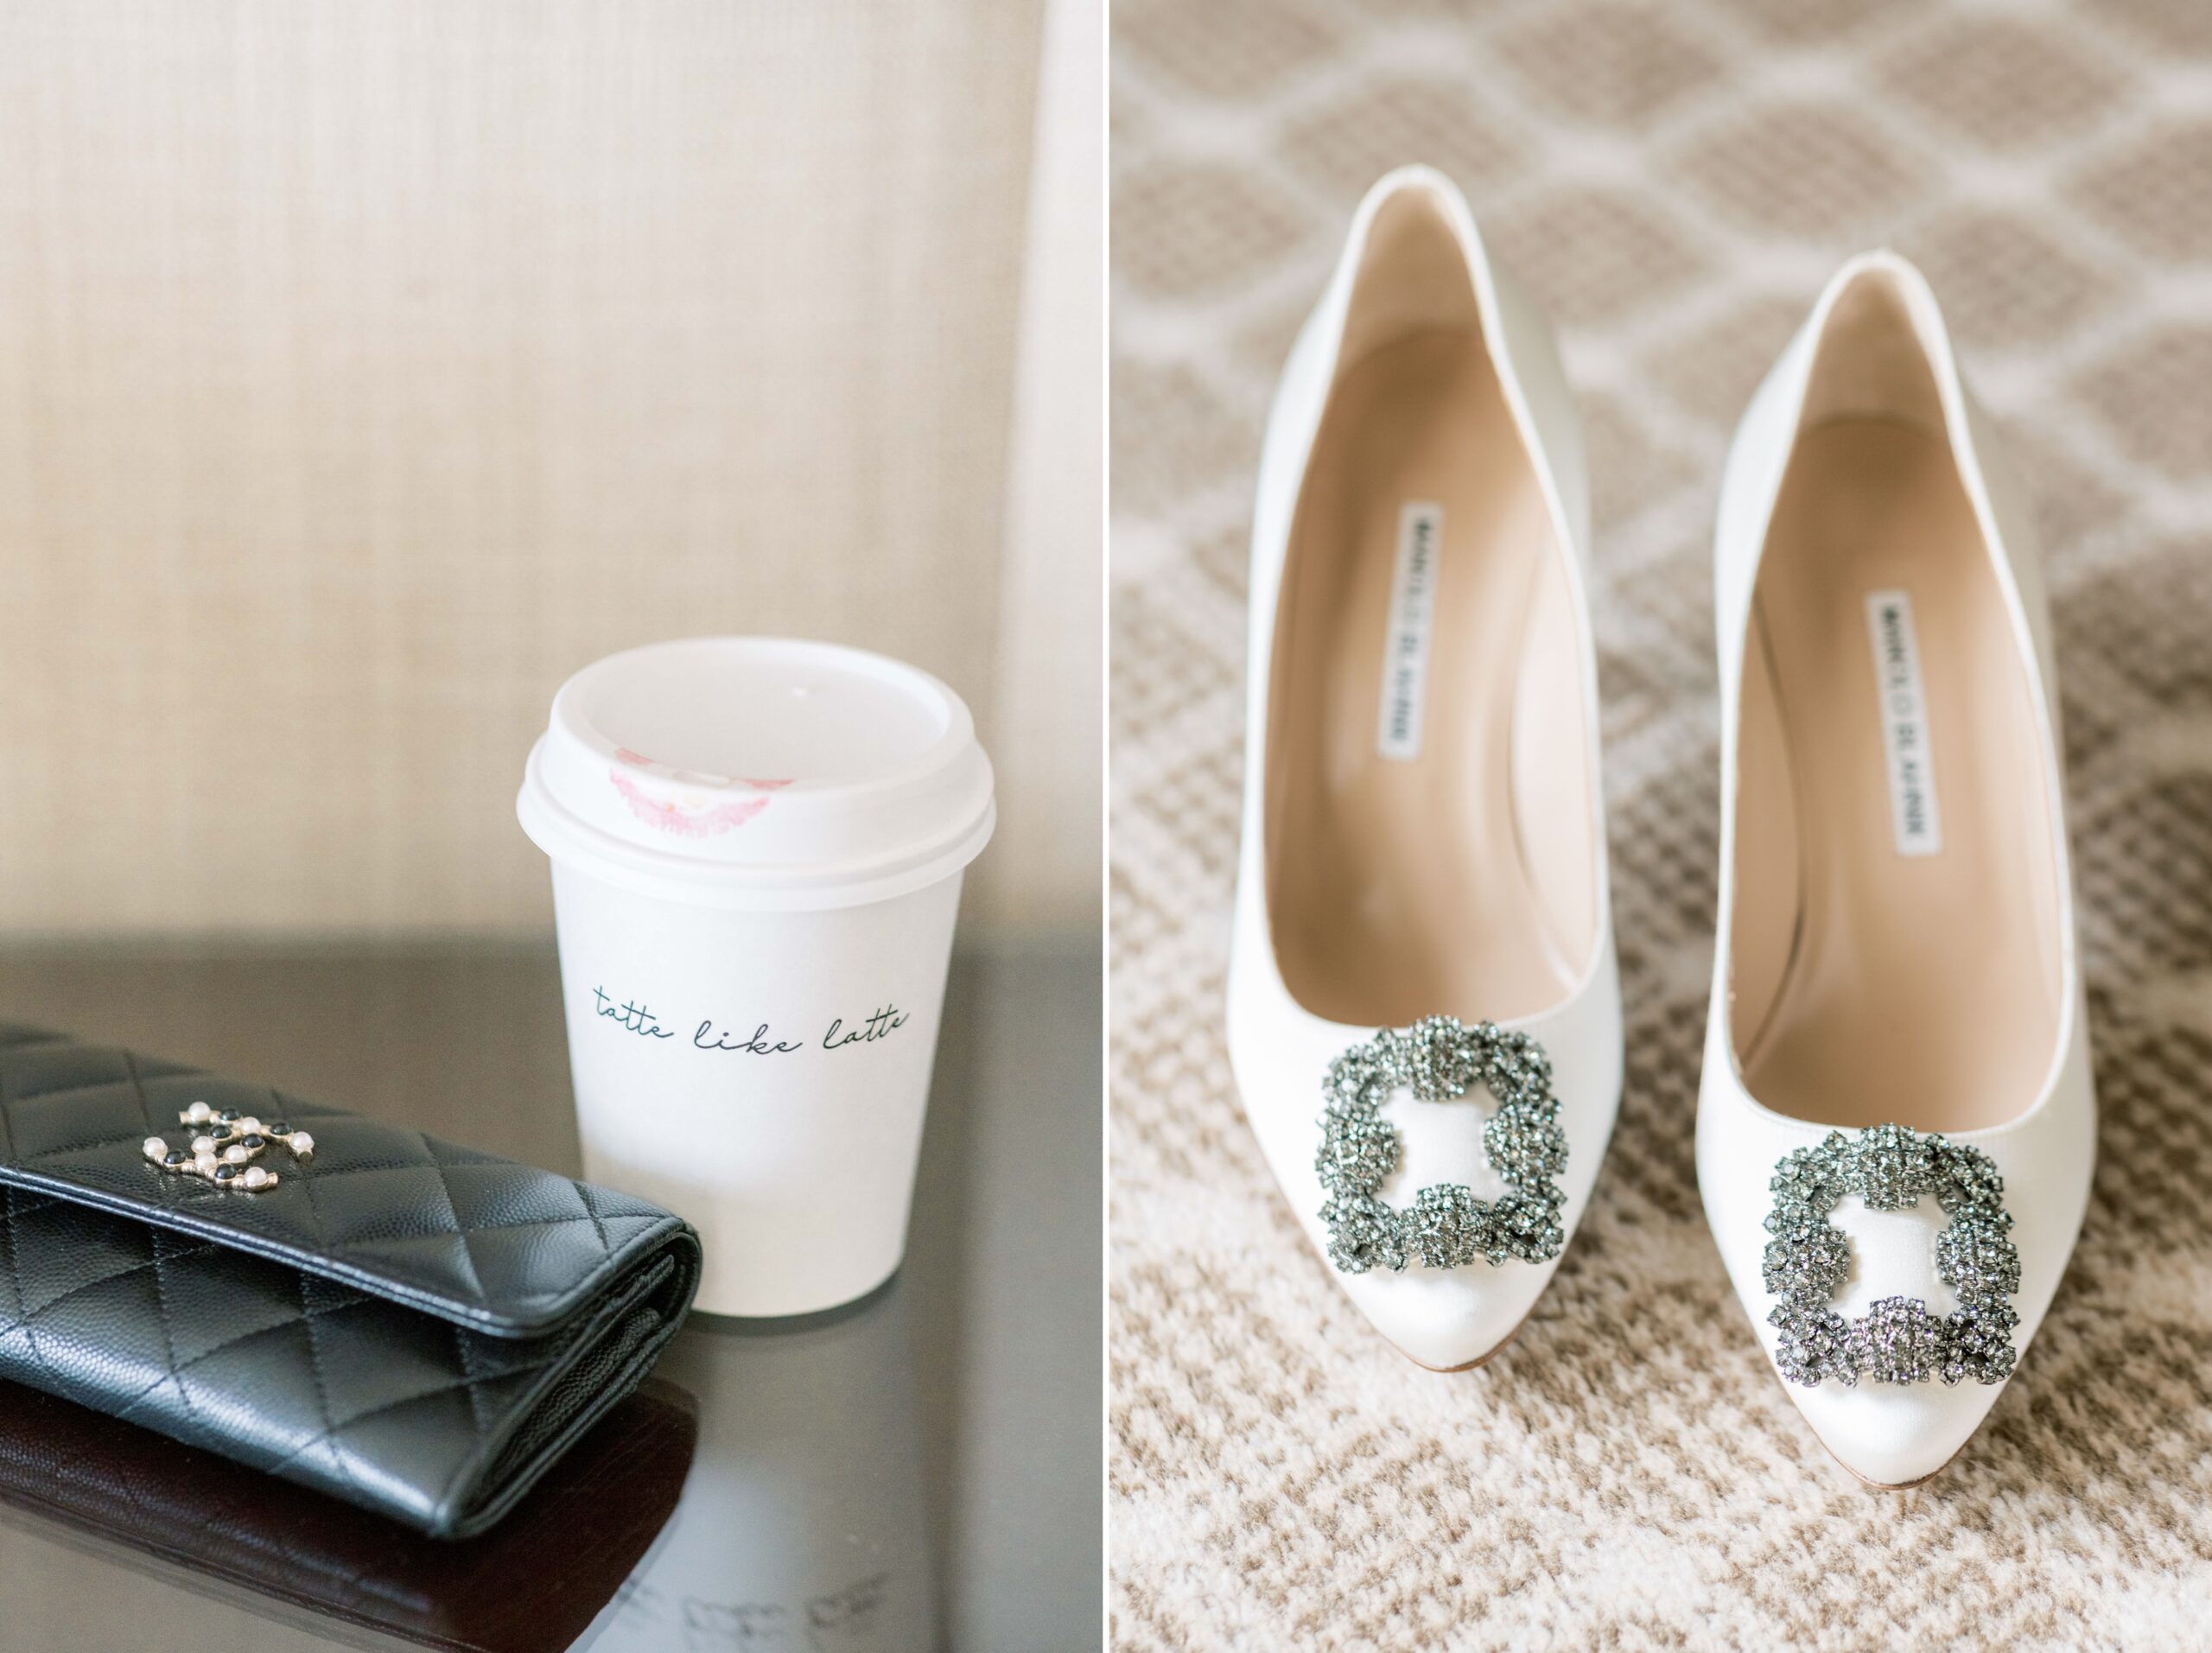 An intimate elopement that takes place in Washington, DC at the Hay Adams hotel and the Jefferson Memorial.